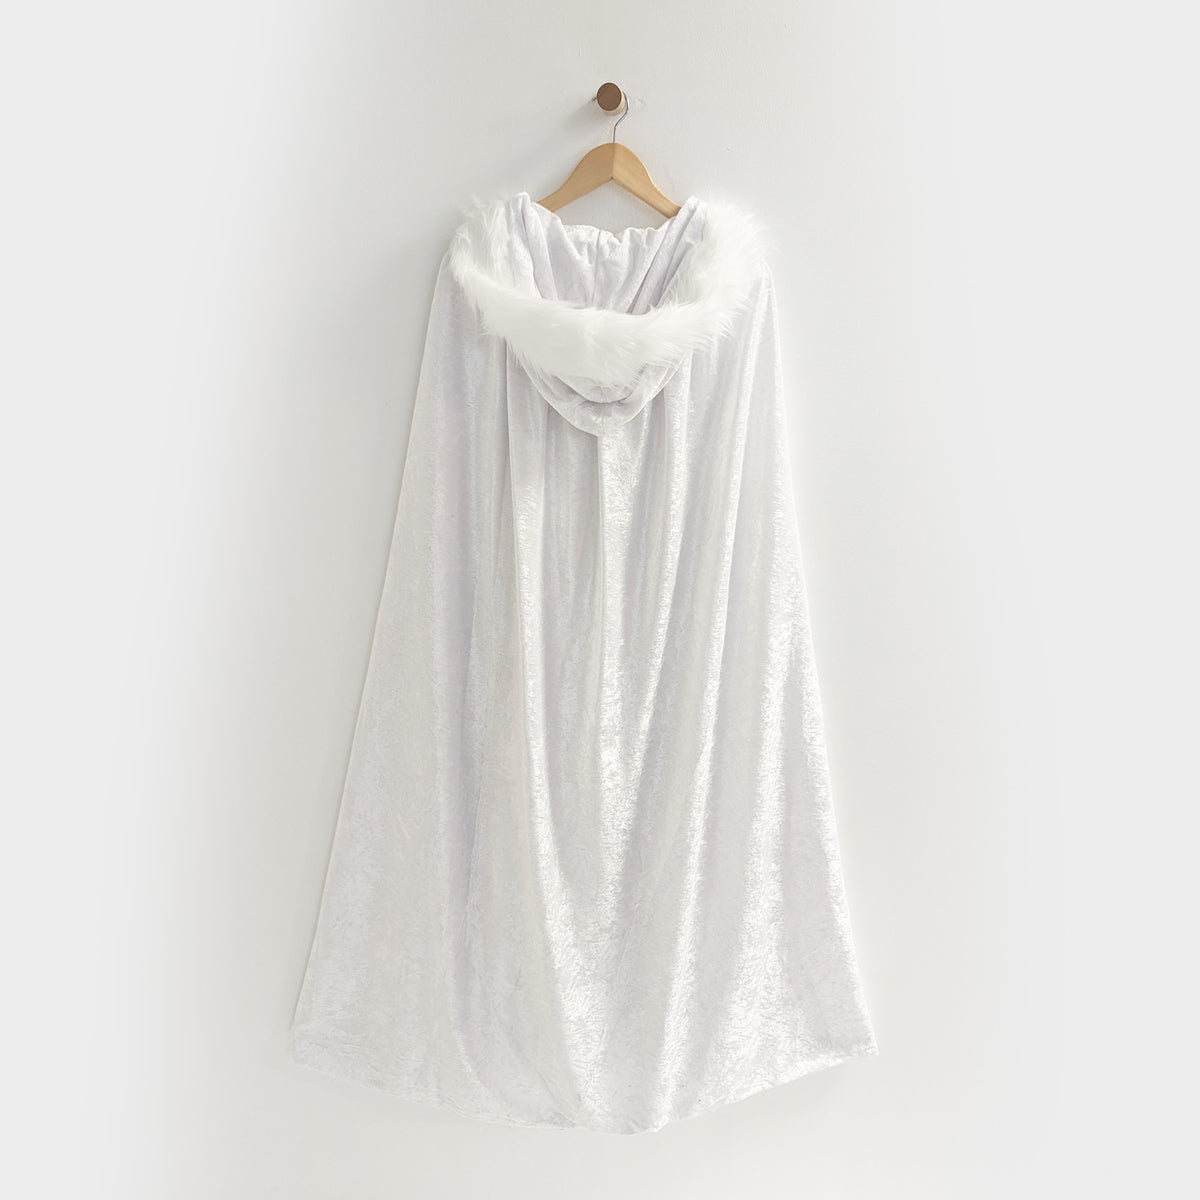 White Cloak with Large Hood, White Faux Fur Trim, and Metal Clasp – Everfan